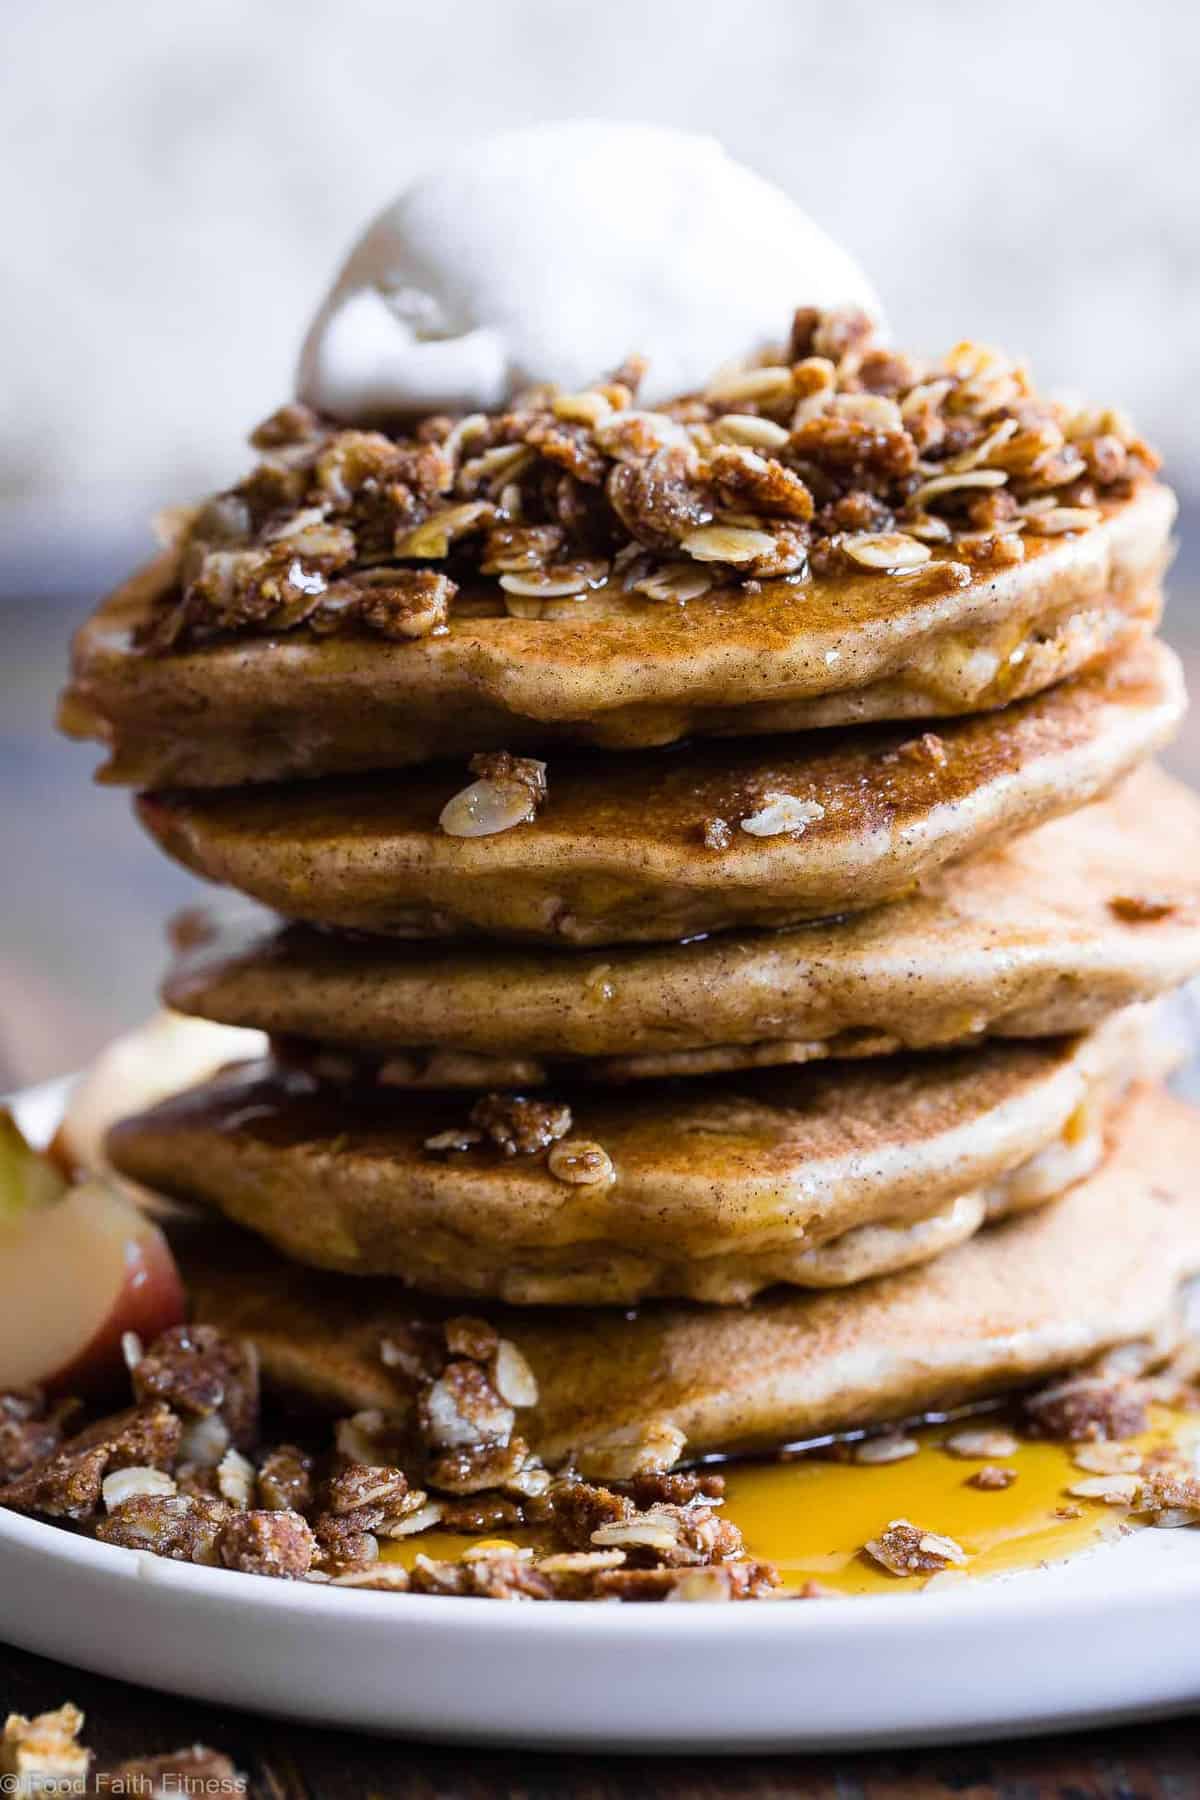 Apple Crisp Greek Yogurt Oatmeal Protein Pancakes - These Healthy Oatmeal Protein Pancakes with Greek Yogurt taste like having apple crisp for breakfast! Gluten free, made from simple, wholesome ingredients and SO thick and fluffy! | #Foodfaithfitness | #Glutenfree #Dairyfree #Greekyogurt #Healthy #Pancakes